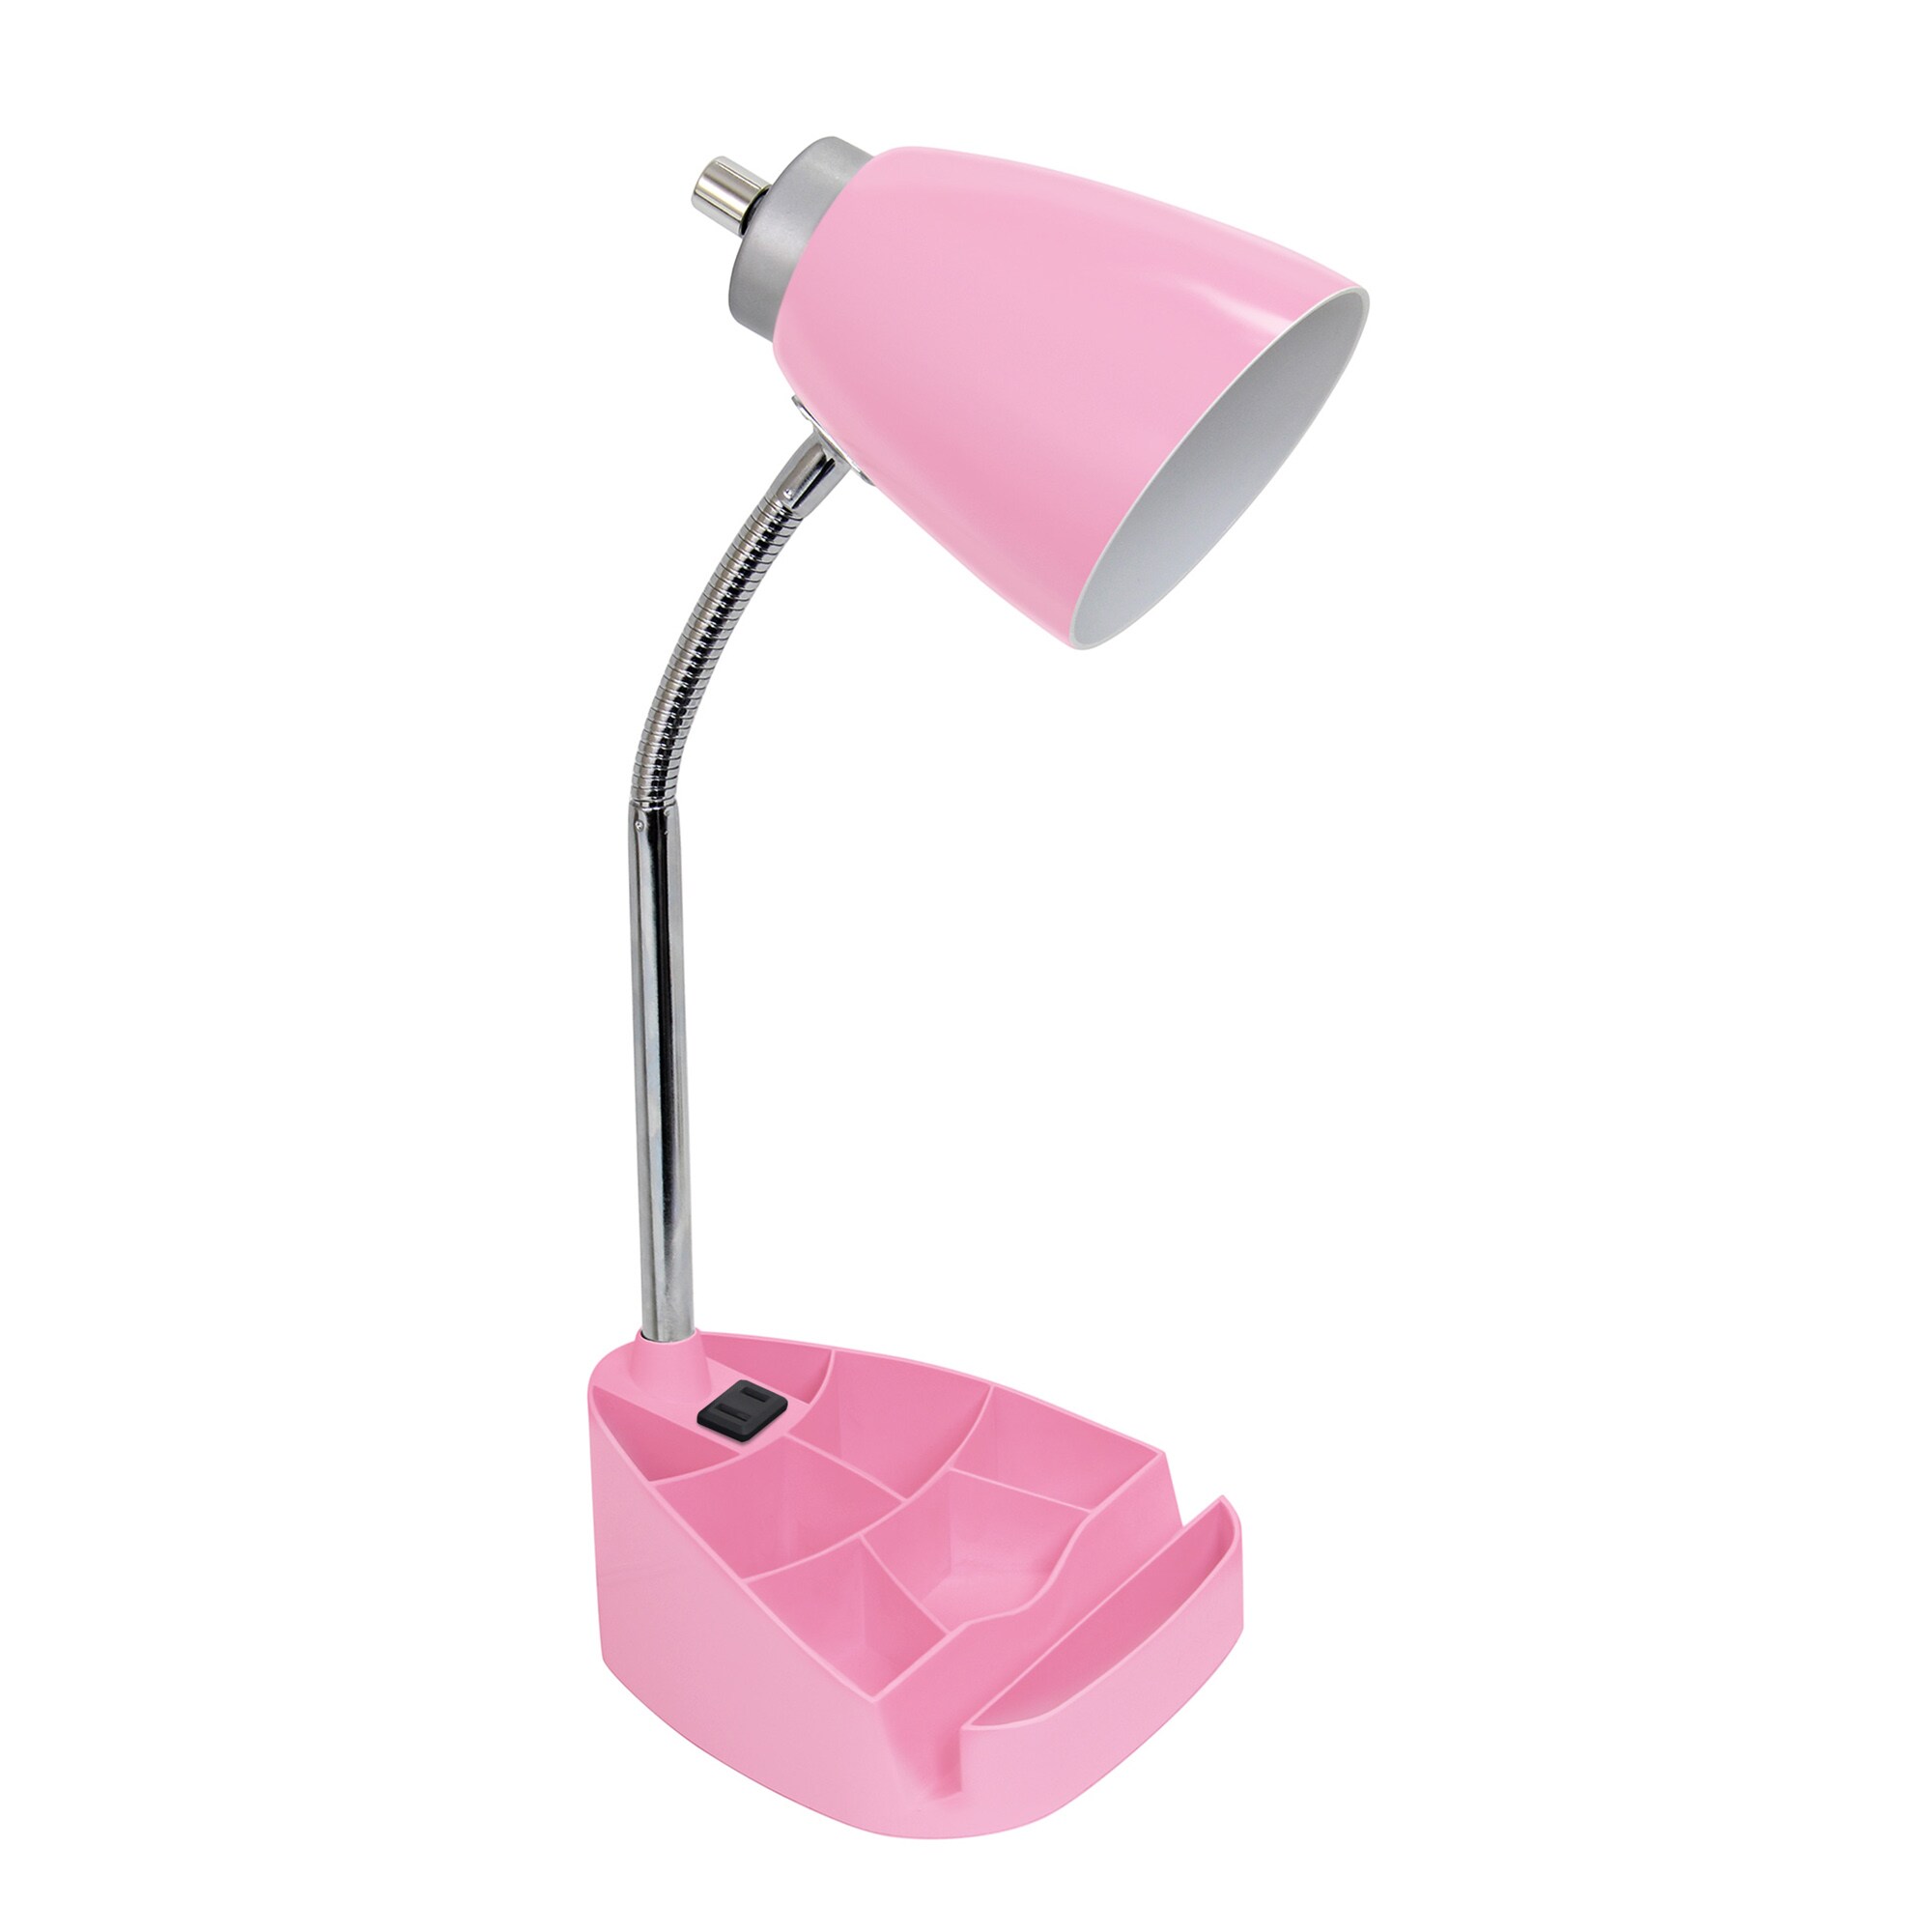 LimeLights 18.5-in Pink Swing-arm Desk Lamp with Plastic Shade in the ...